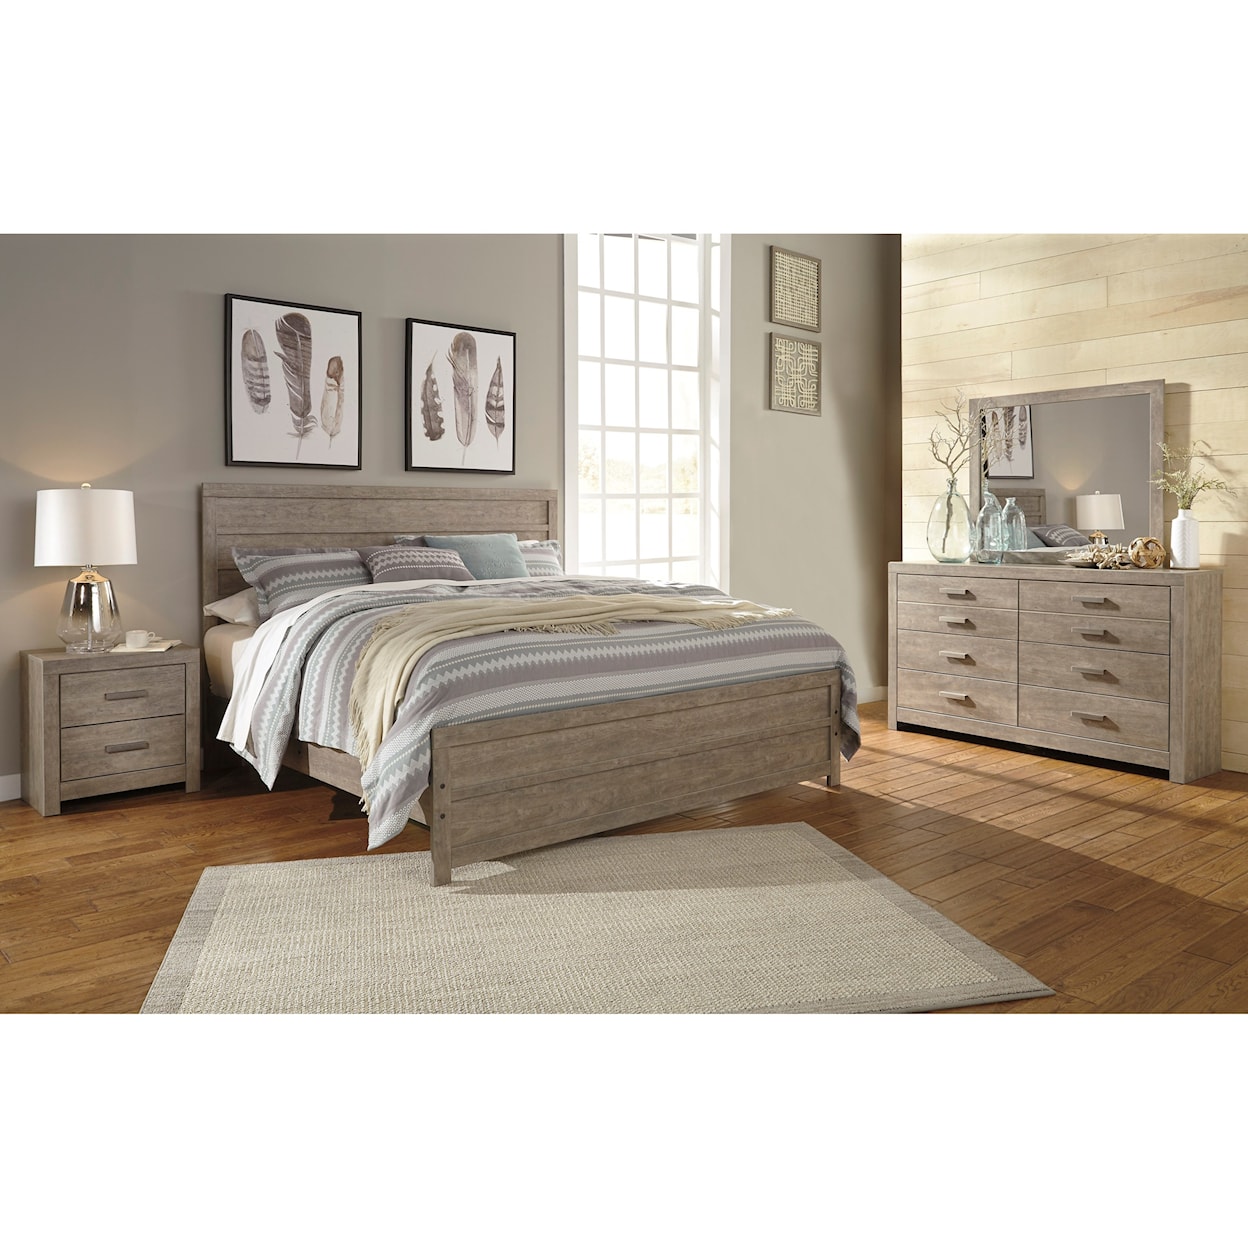 Benchcraft Culverbach King Bedroom Group